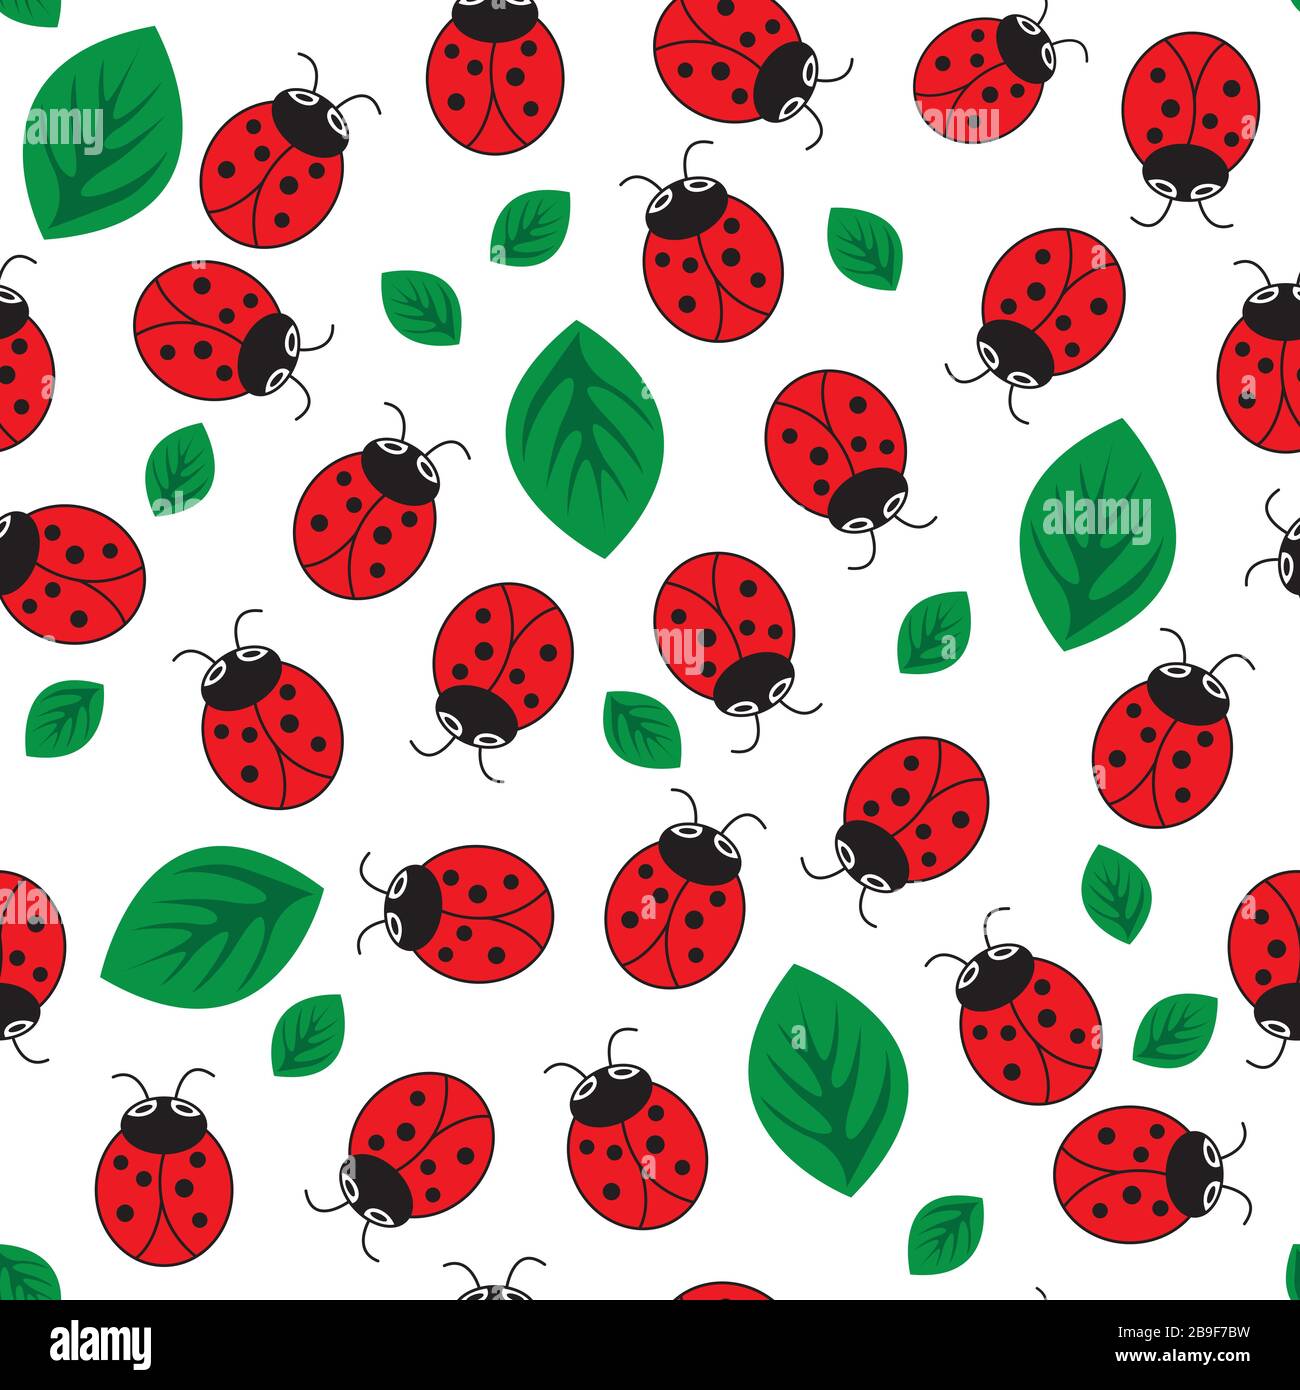 Ladybug with leaves seamless pattern Stock Vector